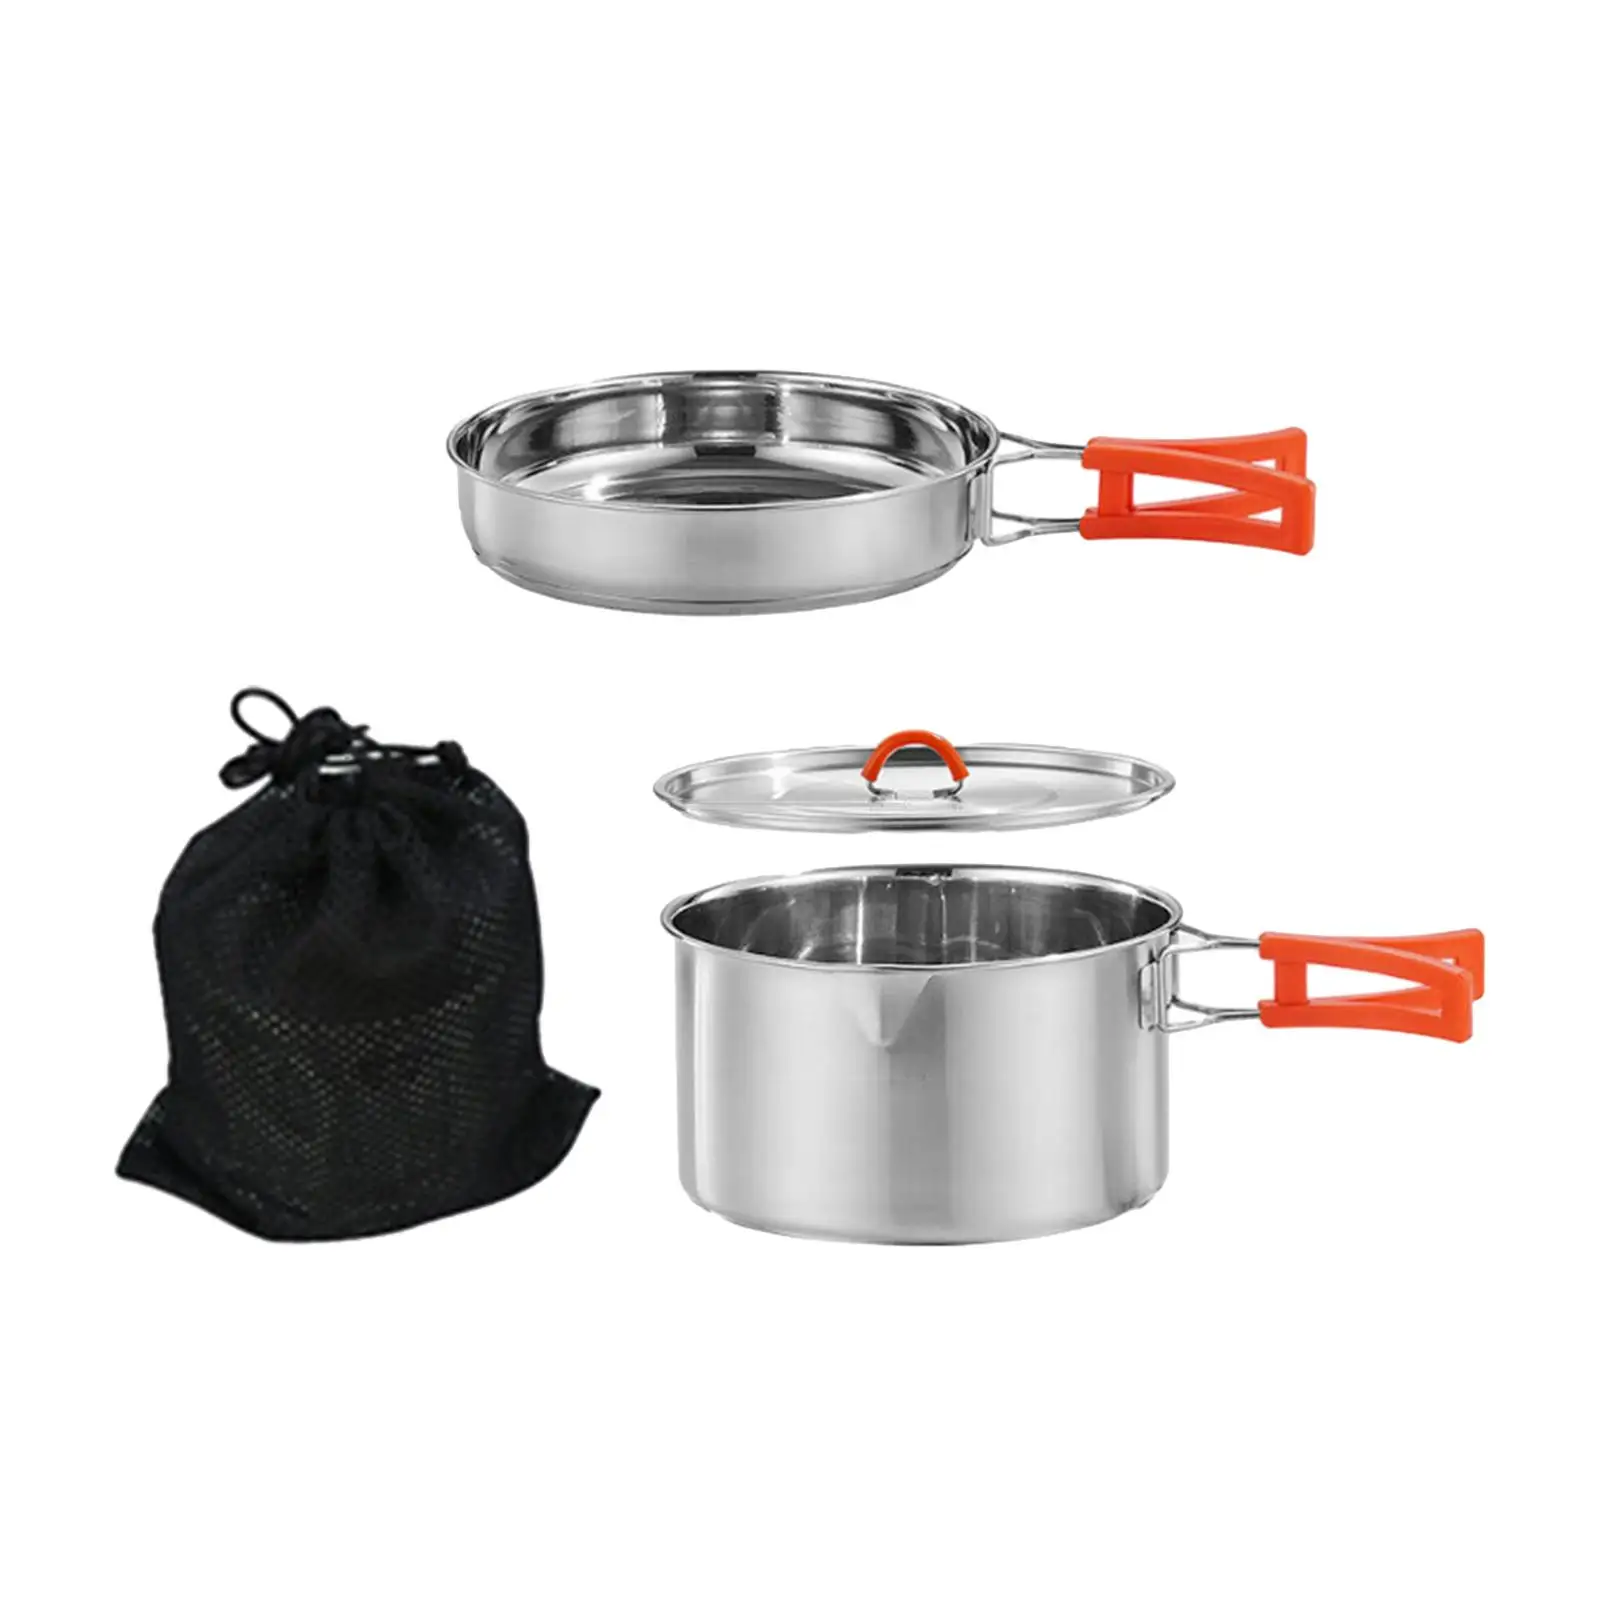 Camping Cookware with Mesh Carry Bag, Easy to Clean Lightweight Camping Pot Pan Camping Cooking Set for Camp Hiking Picnic